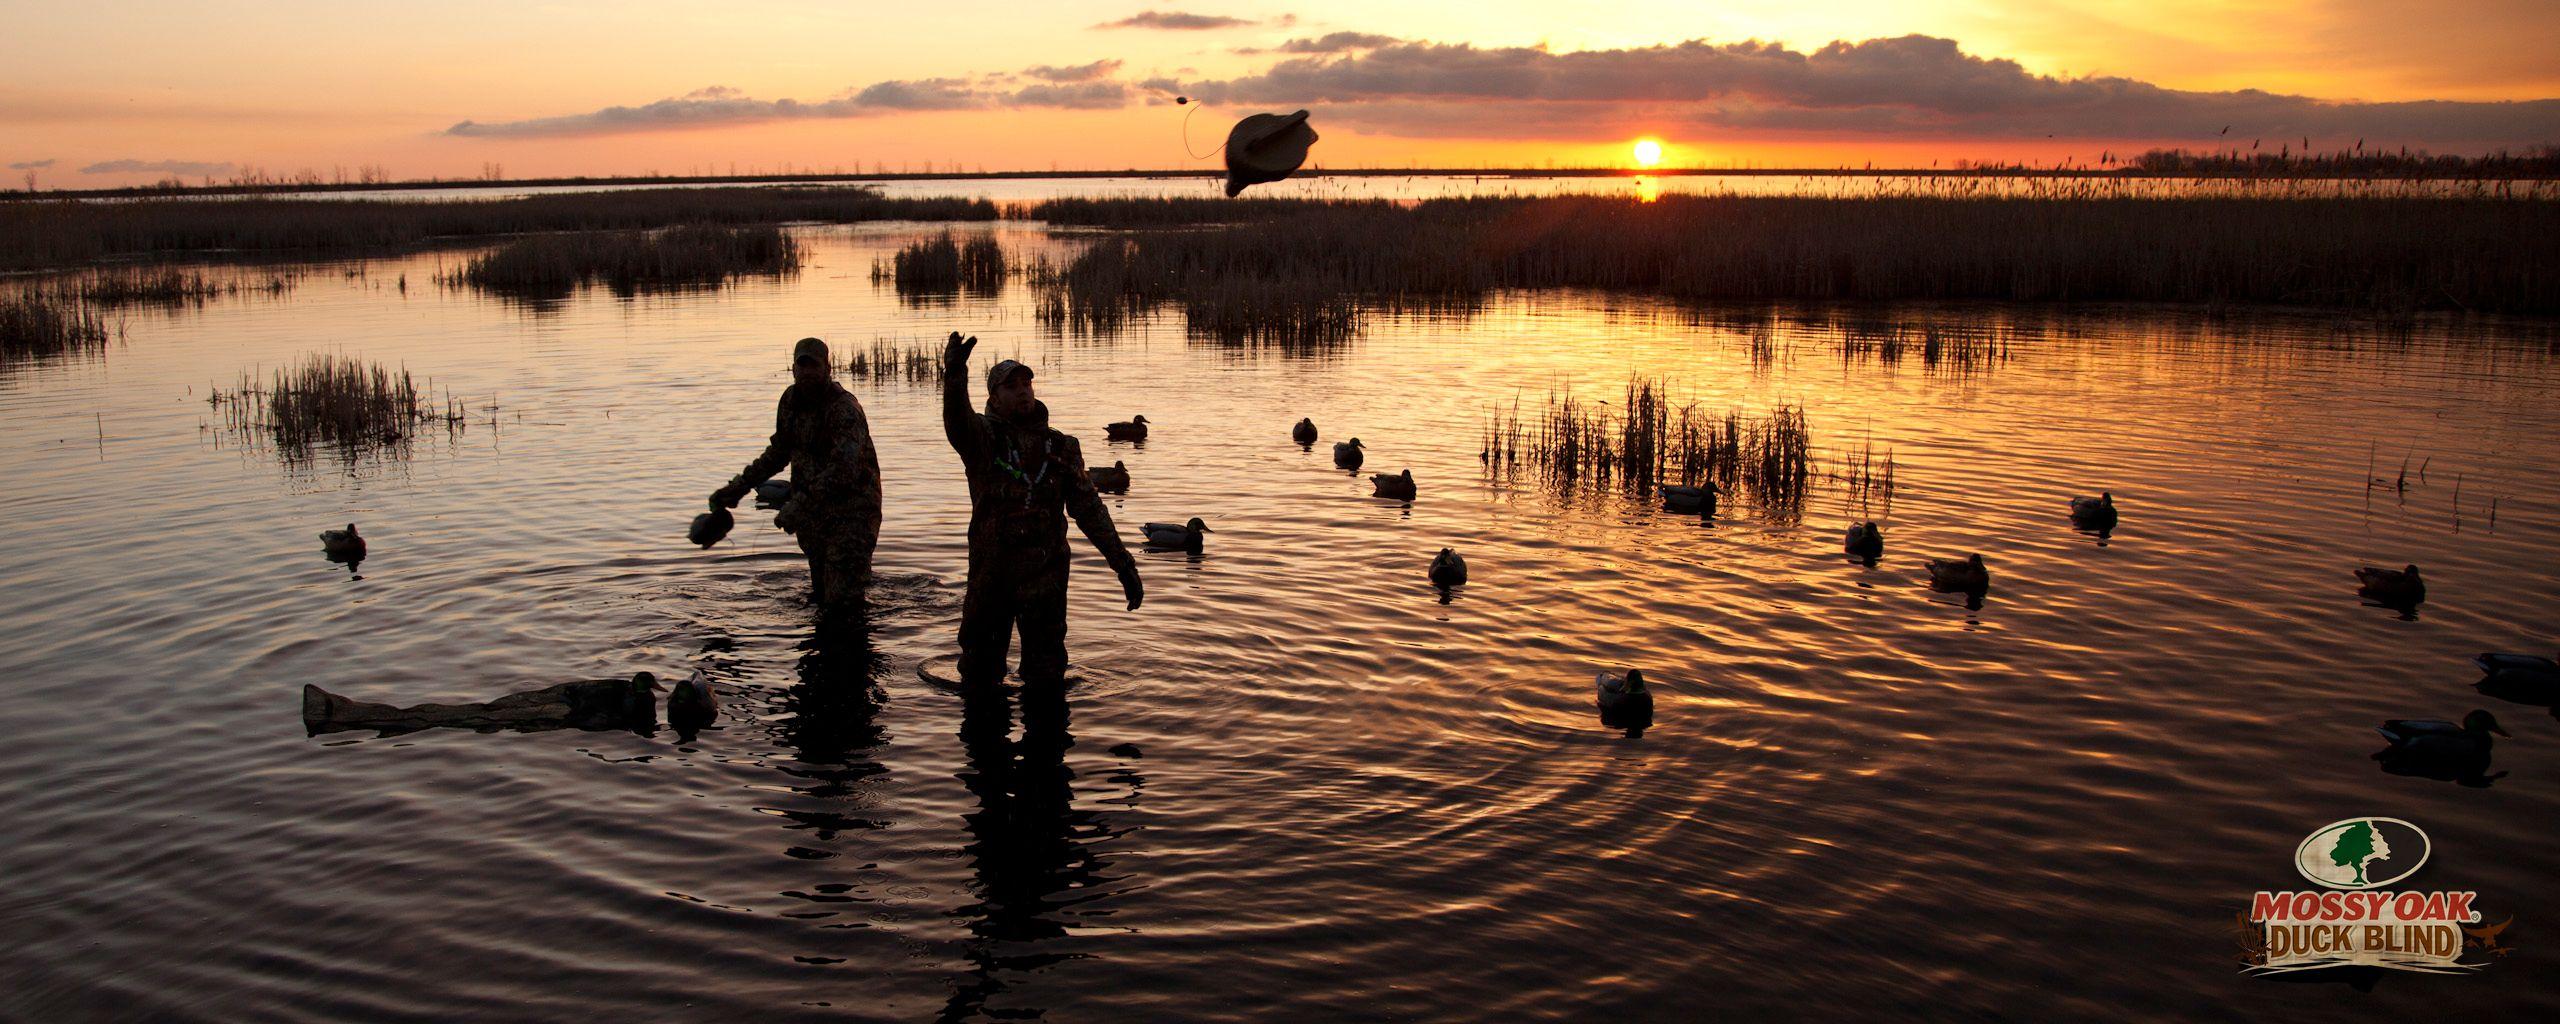 Duck Hunting Wallpaper, HD Duck Hunting Wallpaper. Duck Hunting